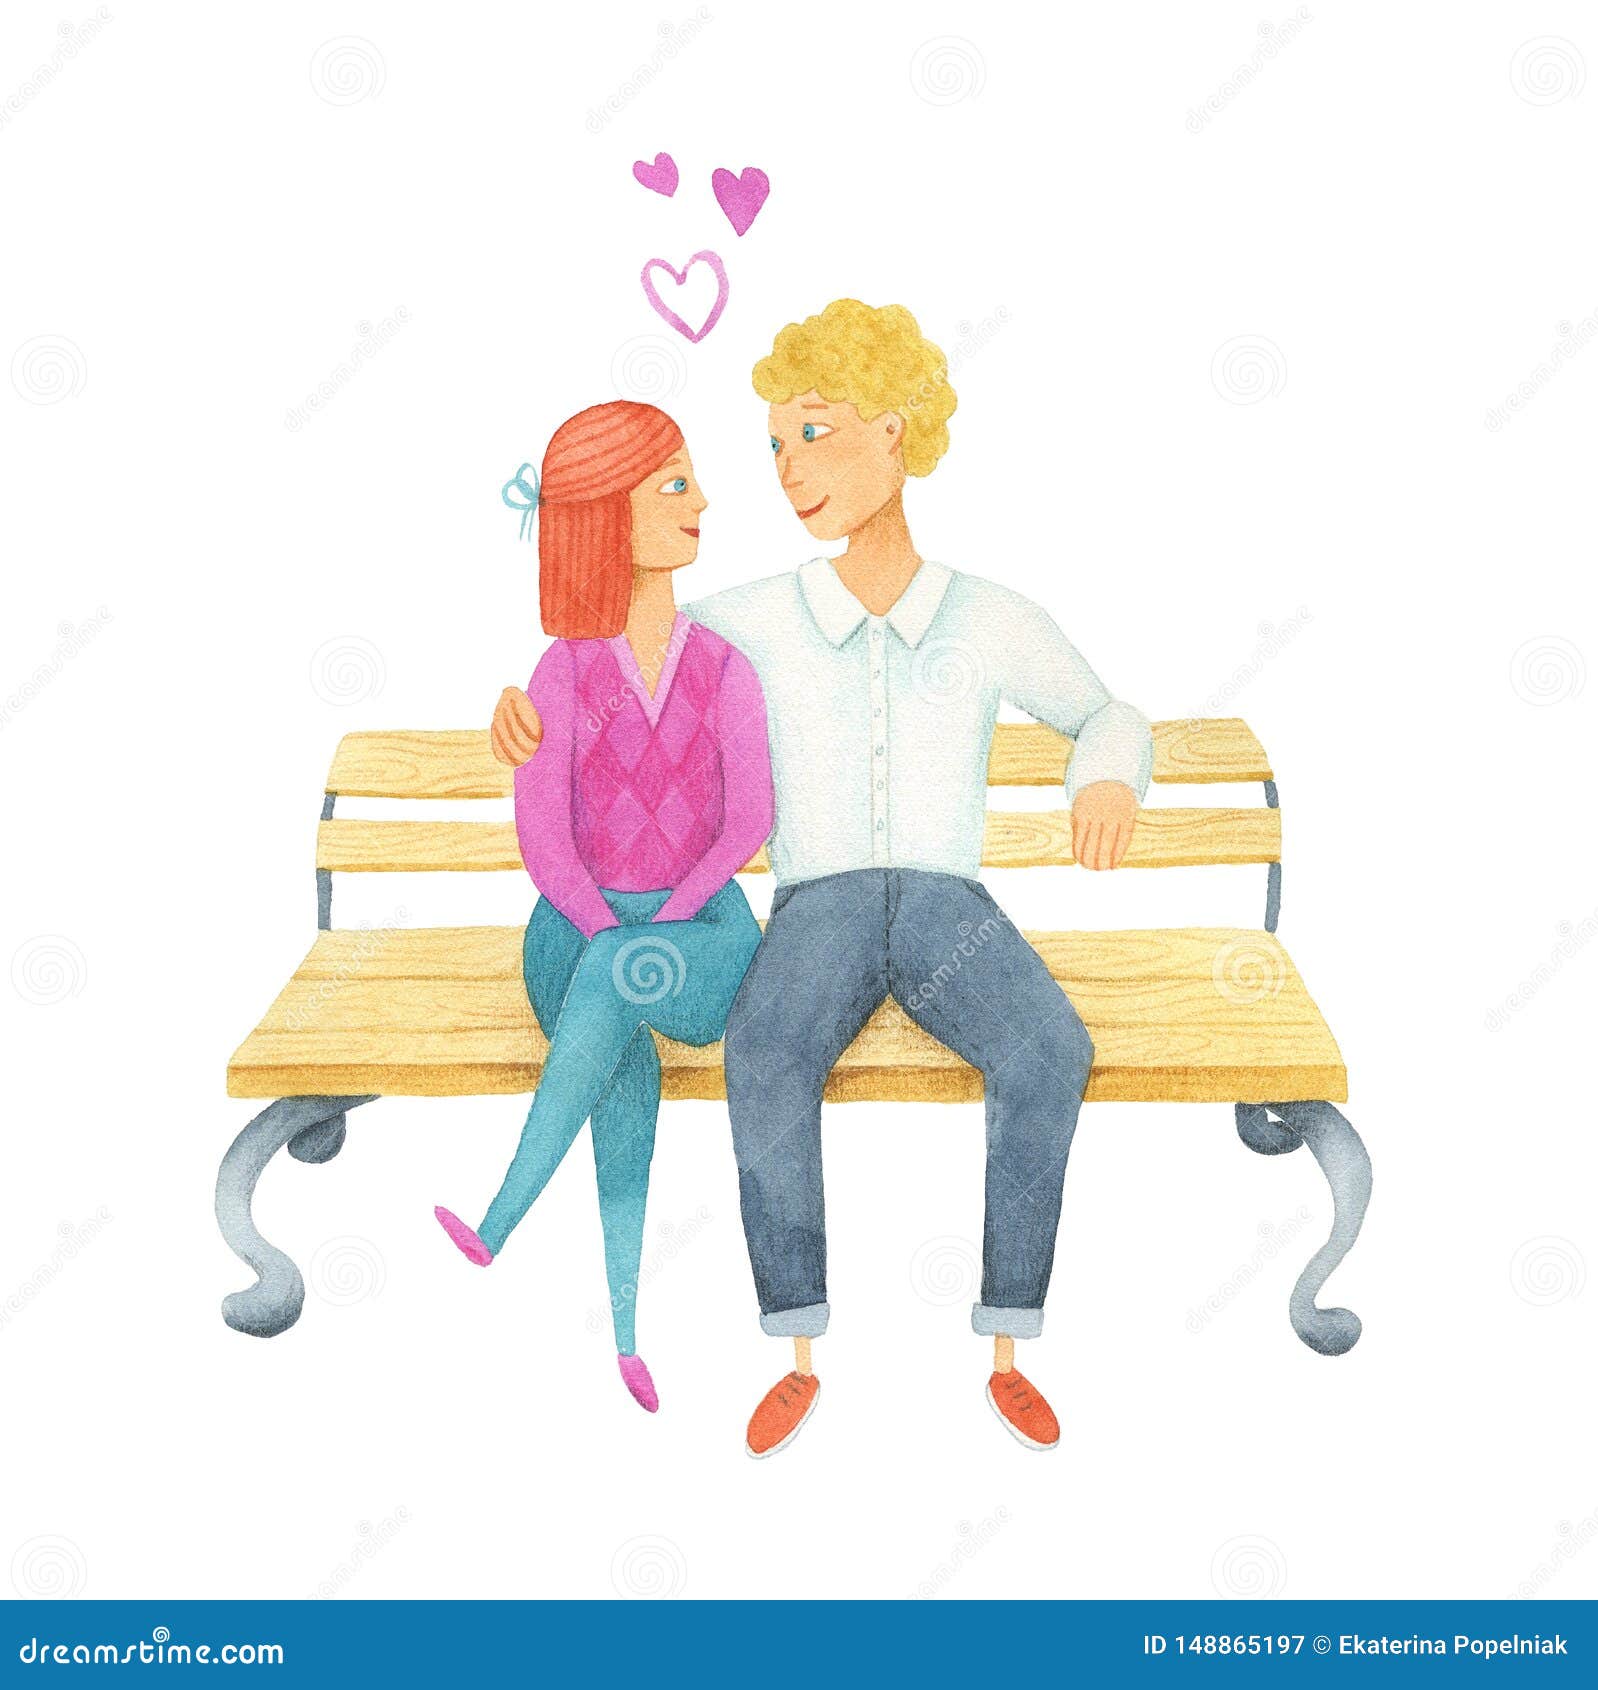 How to draw a girl and boy sitting together